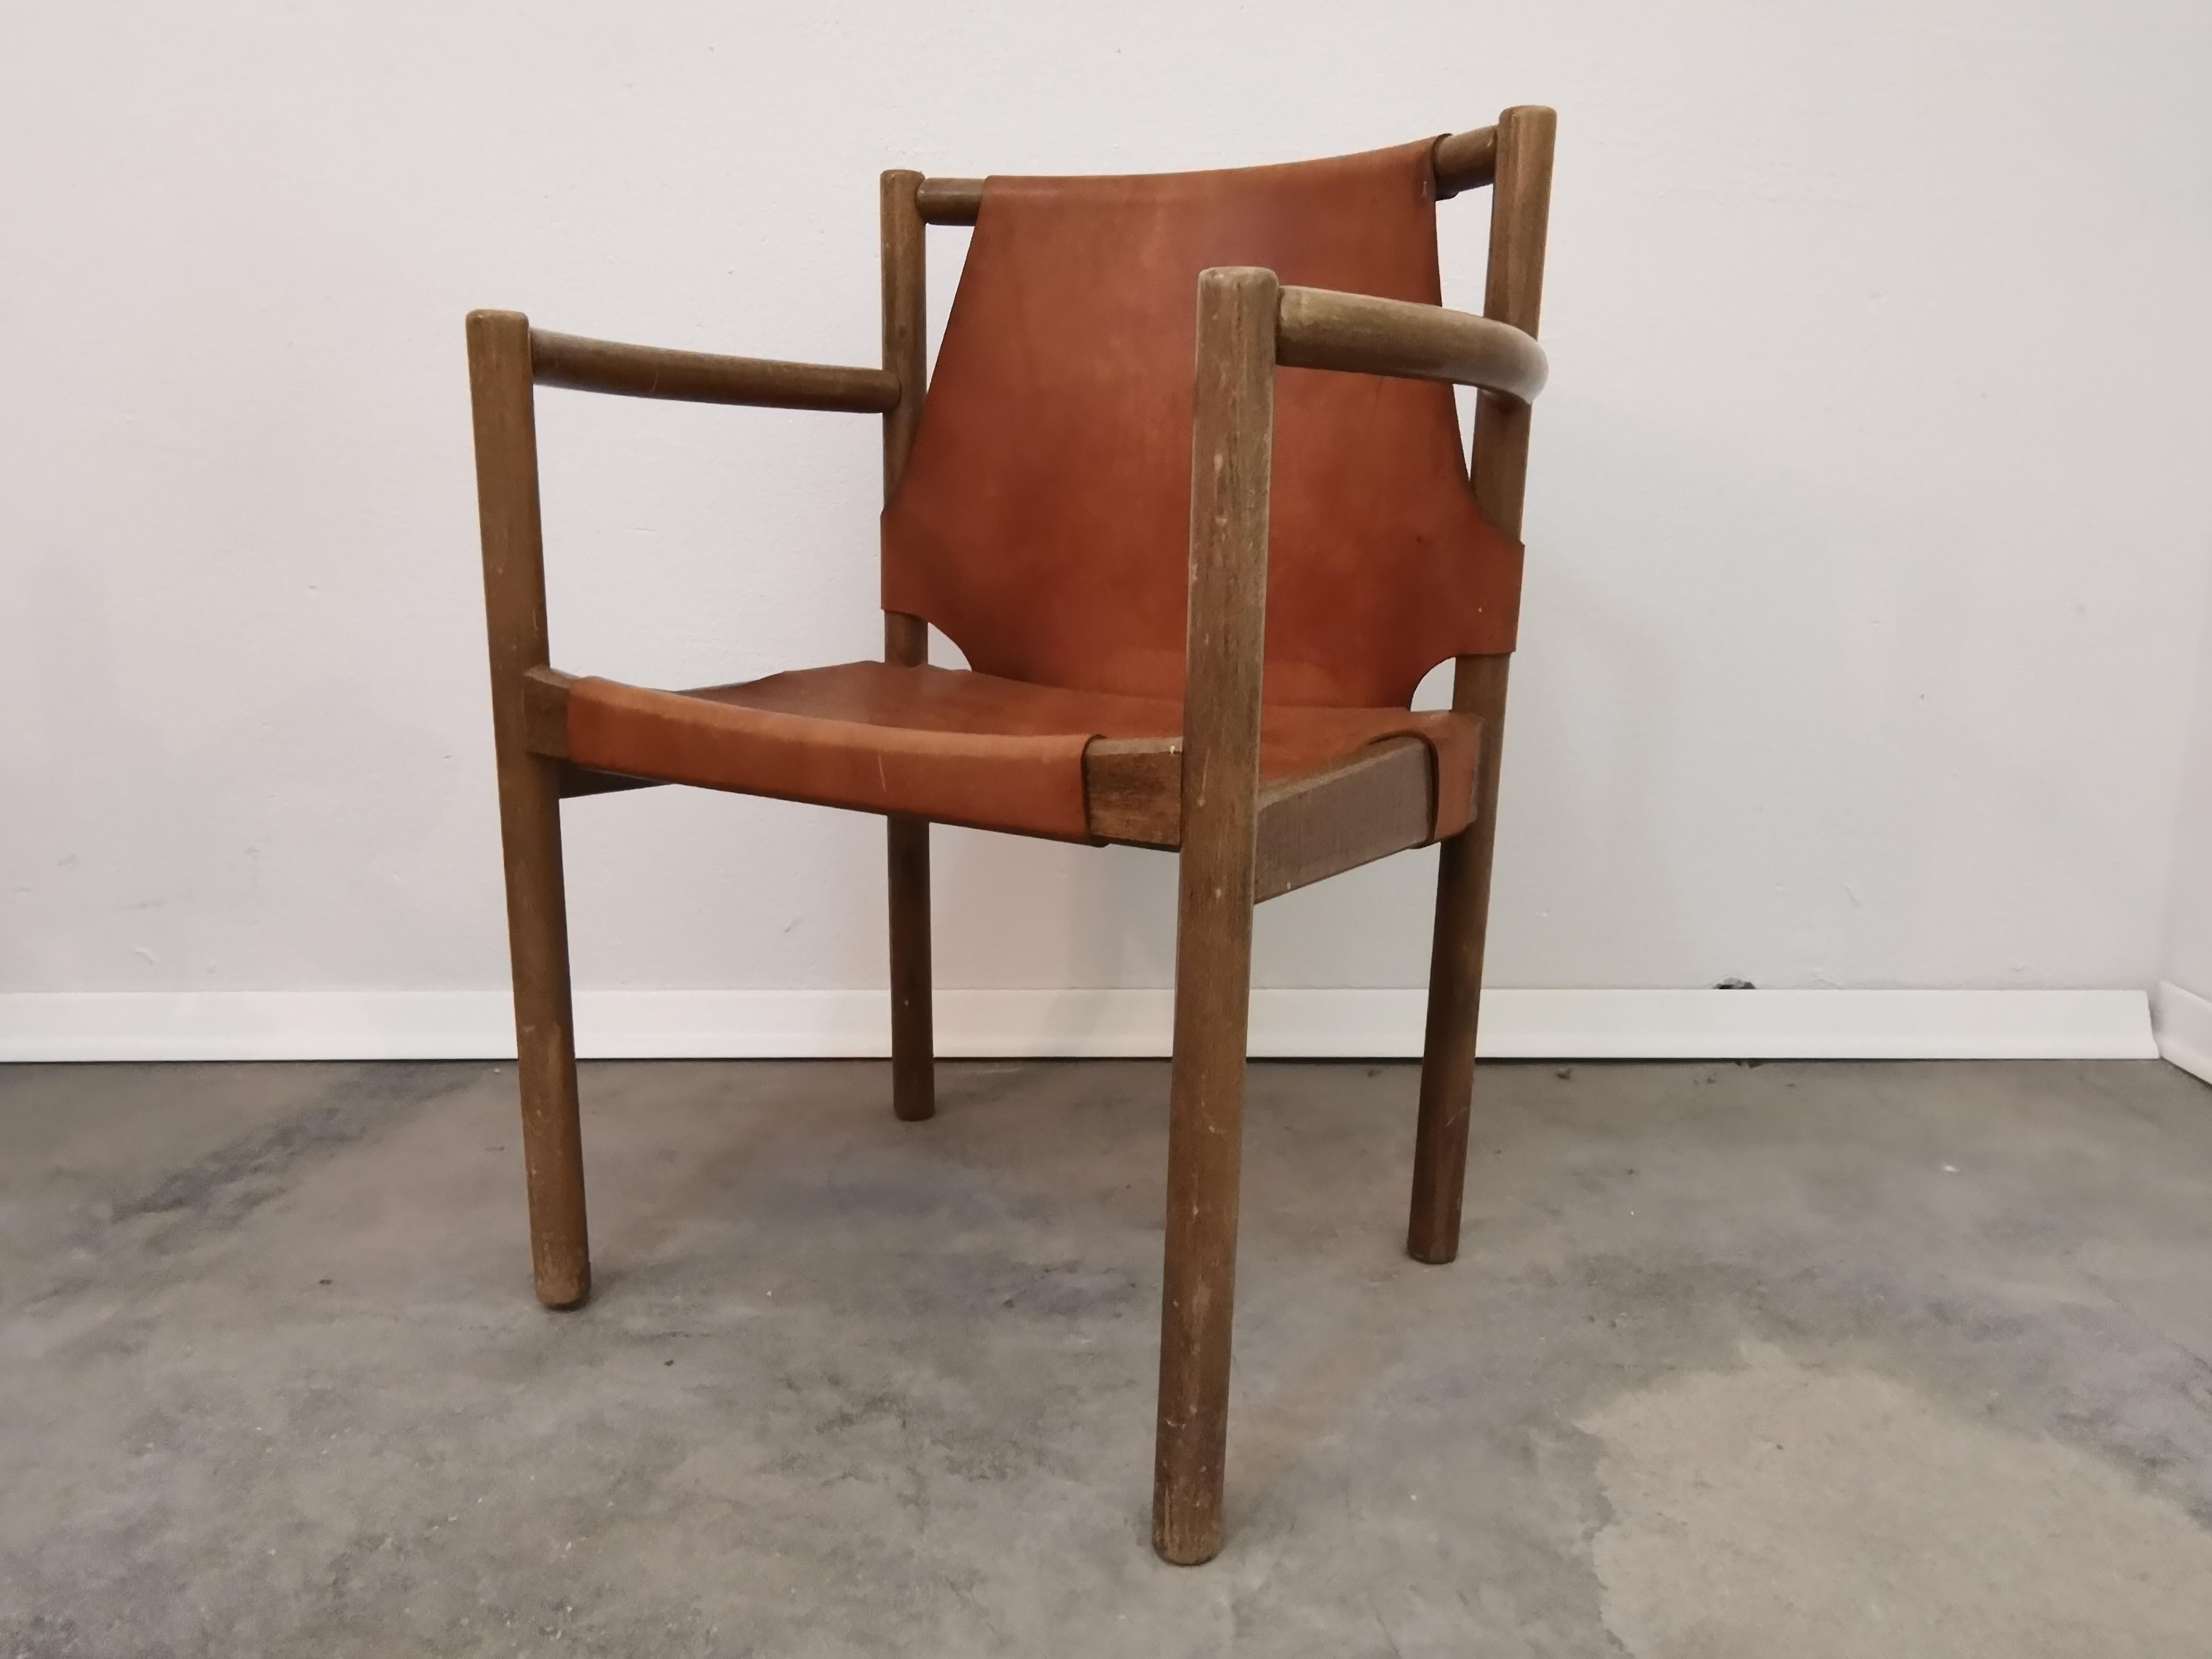 Vintage chair with leather seat
Period of production: 1960s
Style: vintage, classic design, midcentury modern
Materials: wood, leather
Colour: brown.